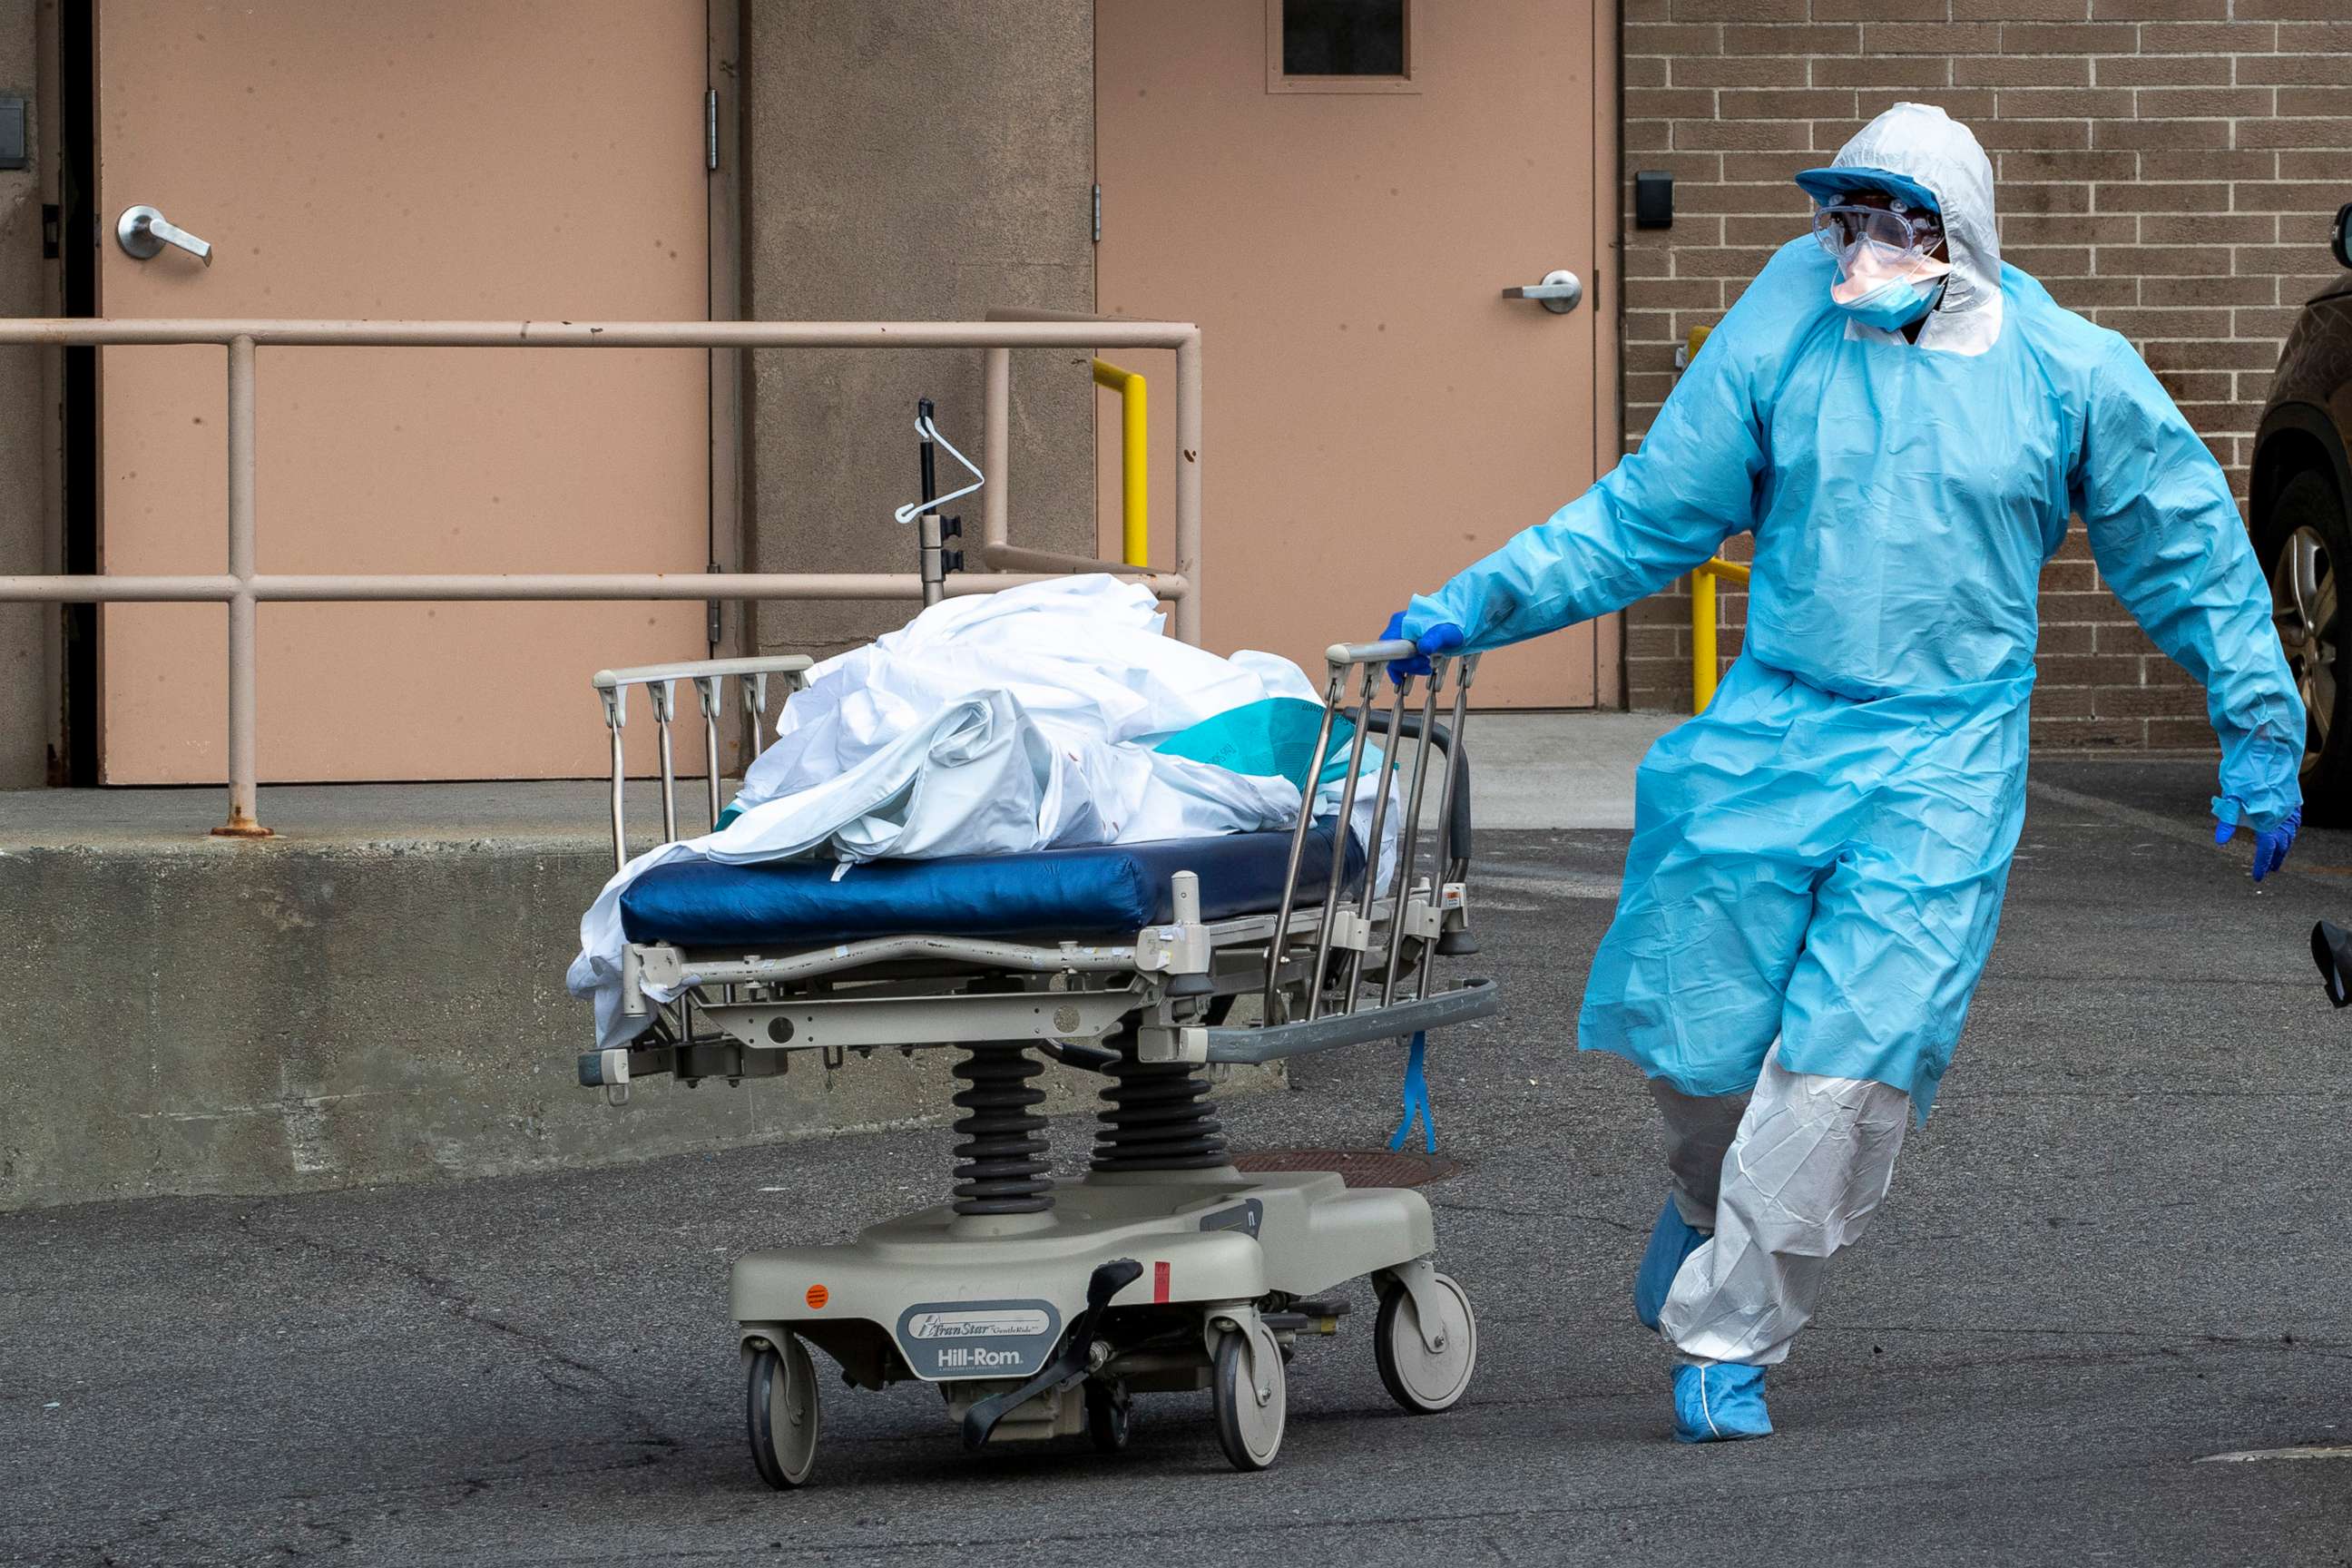 PHOTO: Medical personnel wearing personal protective equipment moves a body from the 
Wyckoff Heights Medical Center to refrigerated containers parked outside, April 2, 2020, in Brooklyn, New York.